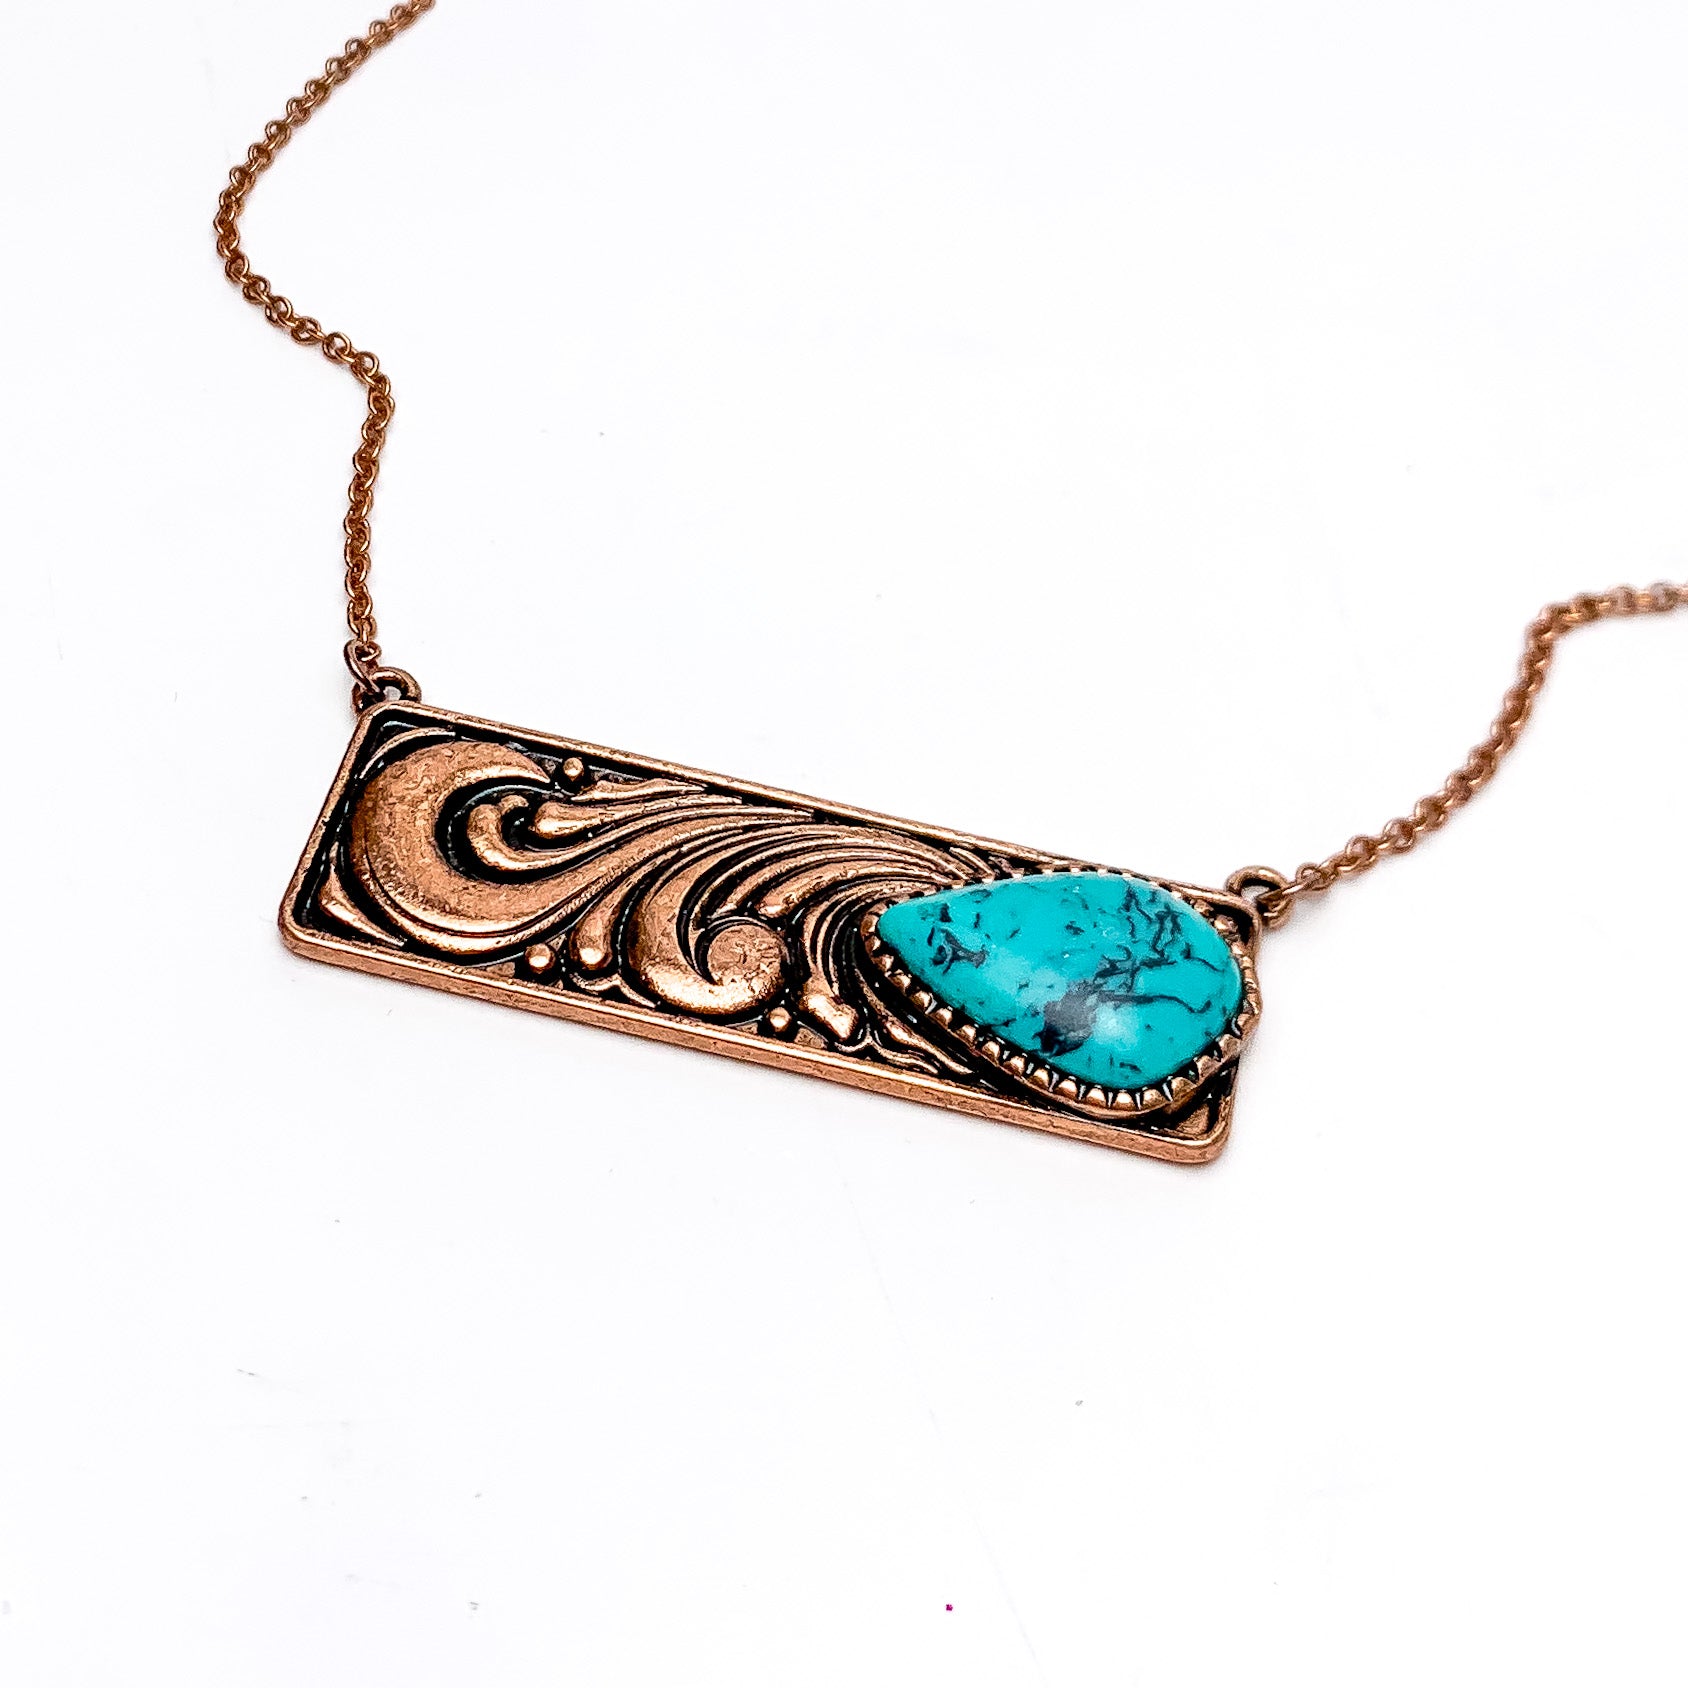 Western Swirl Copper Tone Necklace With Bar Pendent and Turquoise Blue Stone - Giddy Up Glamour Boutique